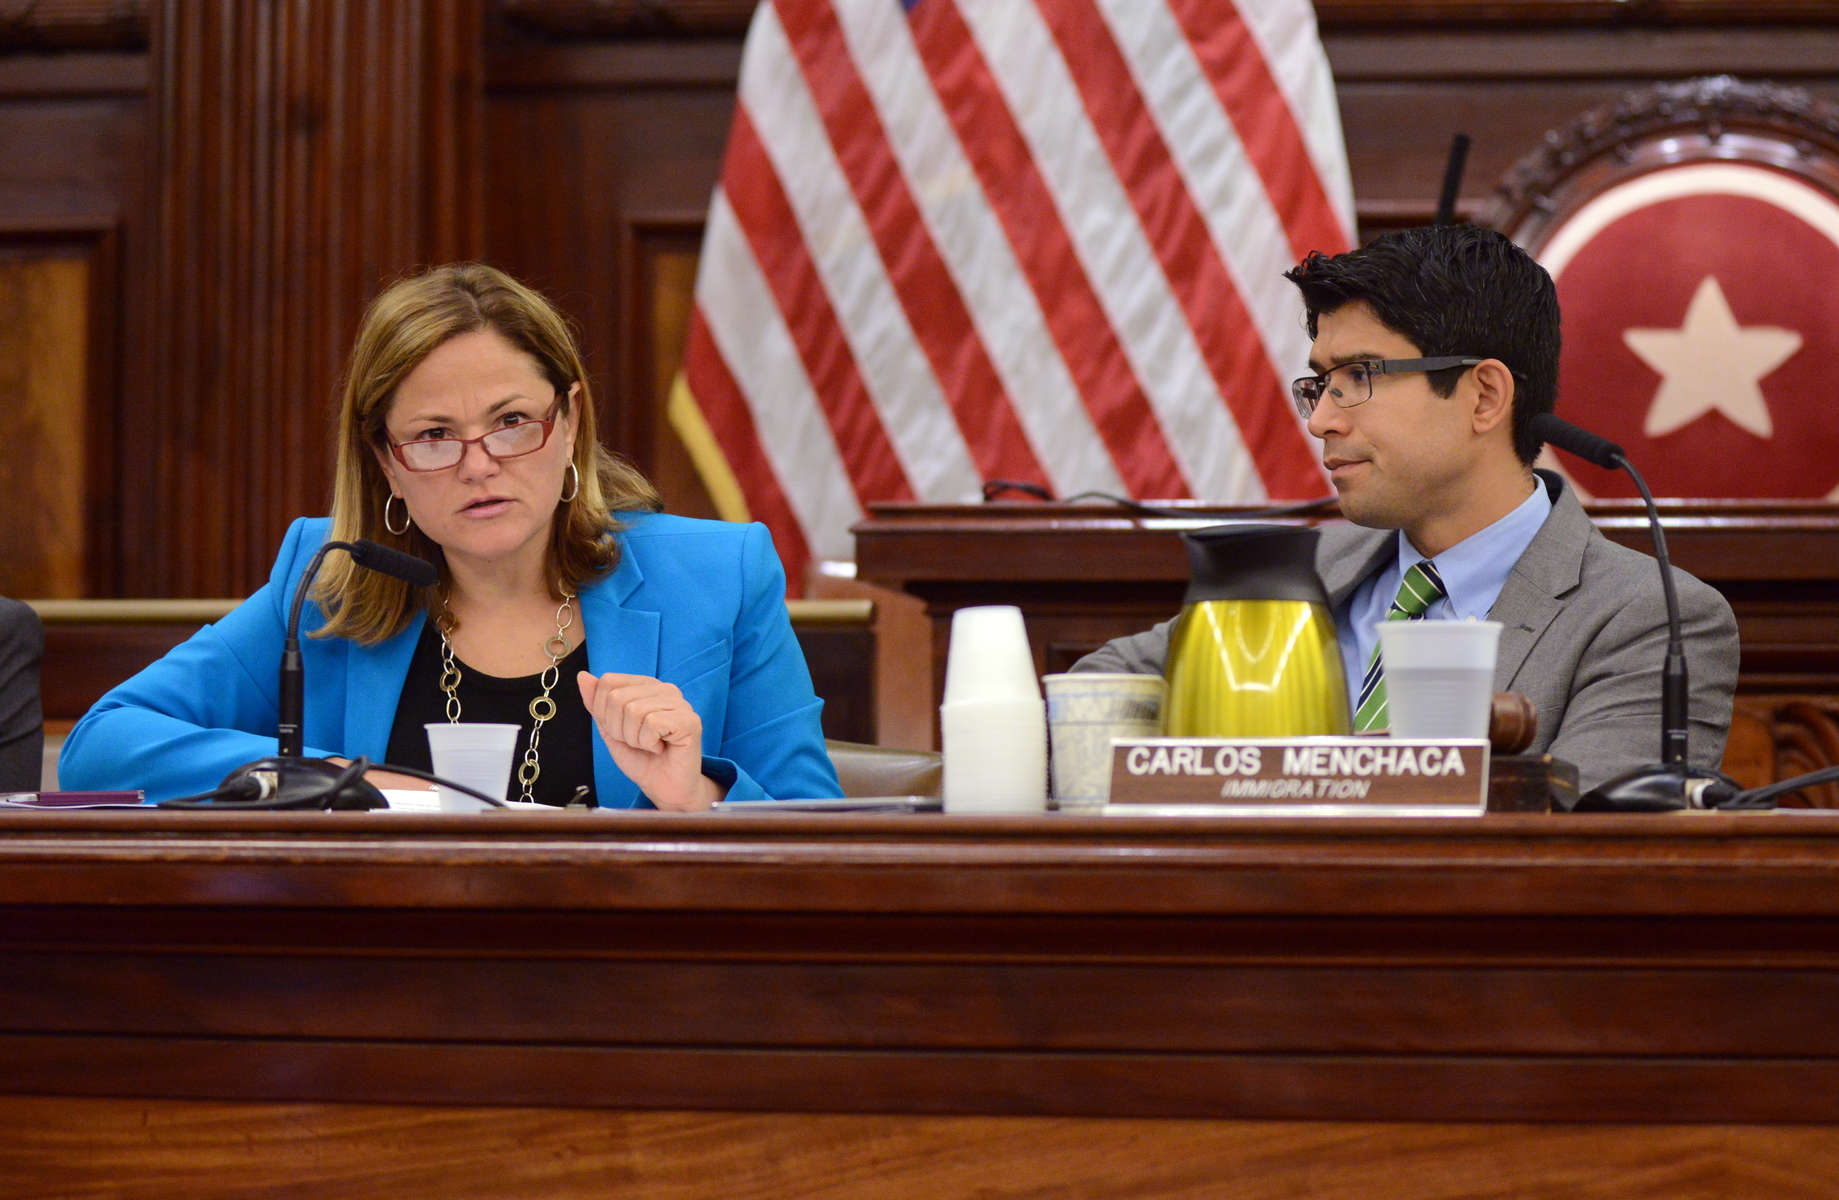 New York City Council hearings on immigration - Monday September 29, 2014City Council Speaker Melissa Mark Viverito, left, and Carlos Menchaca, Council Member and Chair of the Committee on Immigration.